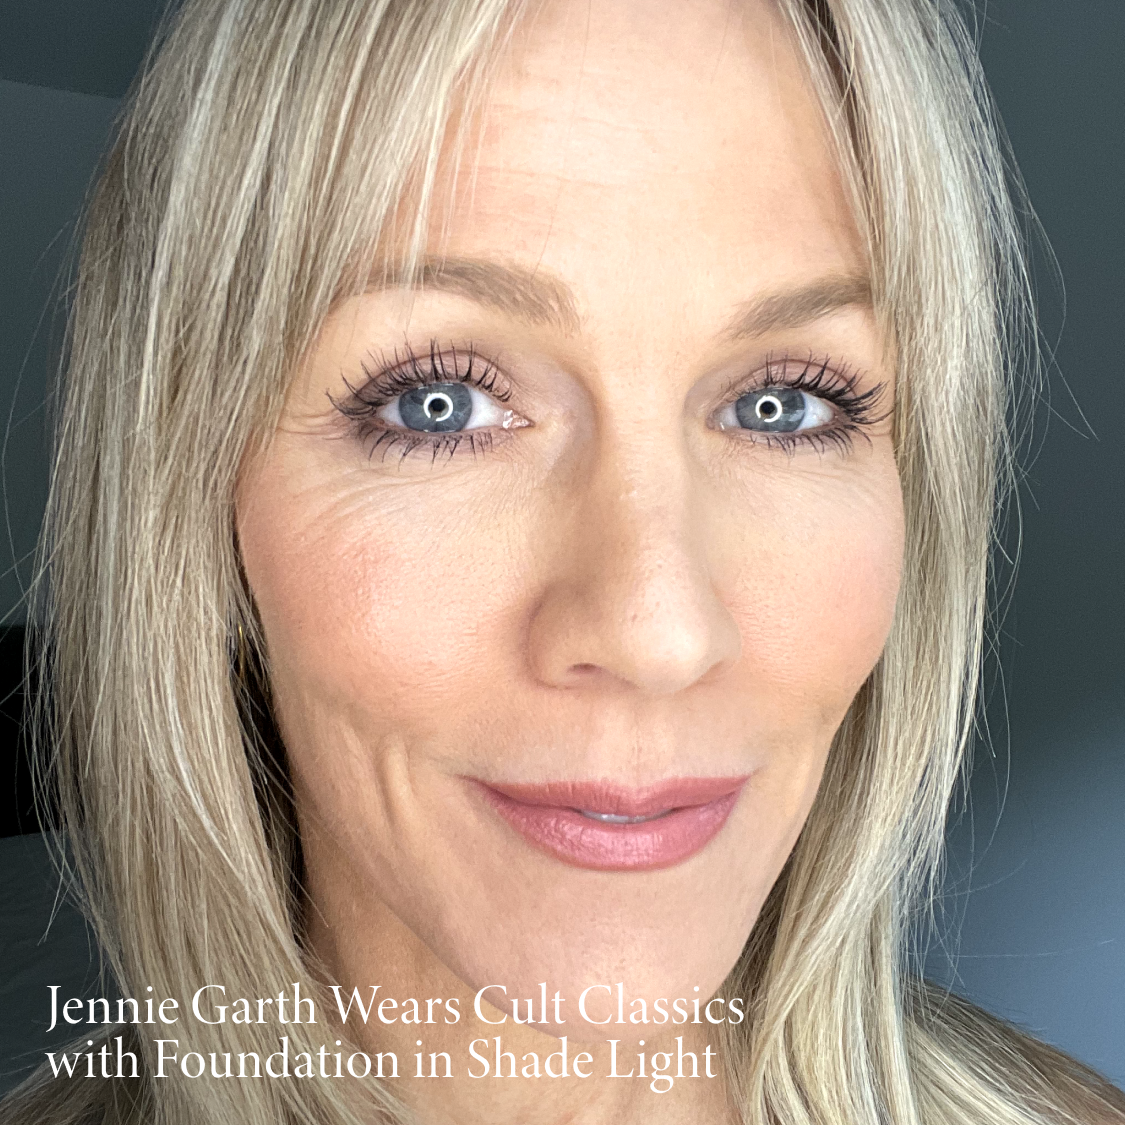 Jennie Garth Wears Cult Classics with Foundation in Shade Light